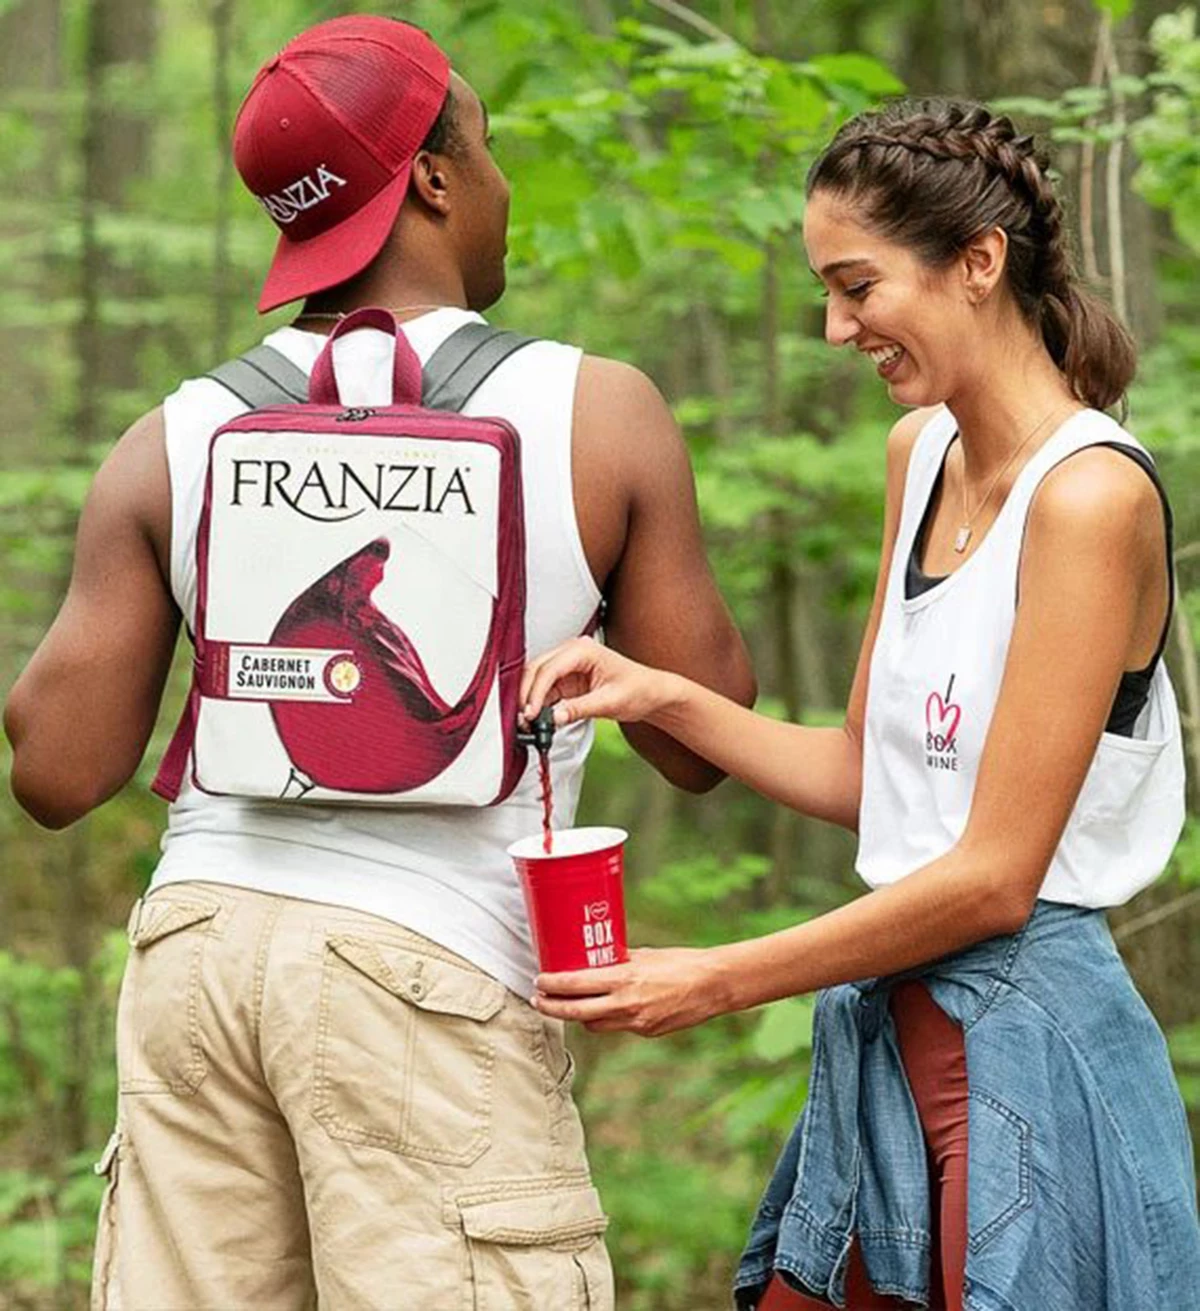 franzia-is-now-selling-boxed-wine-backpacks